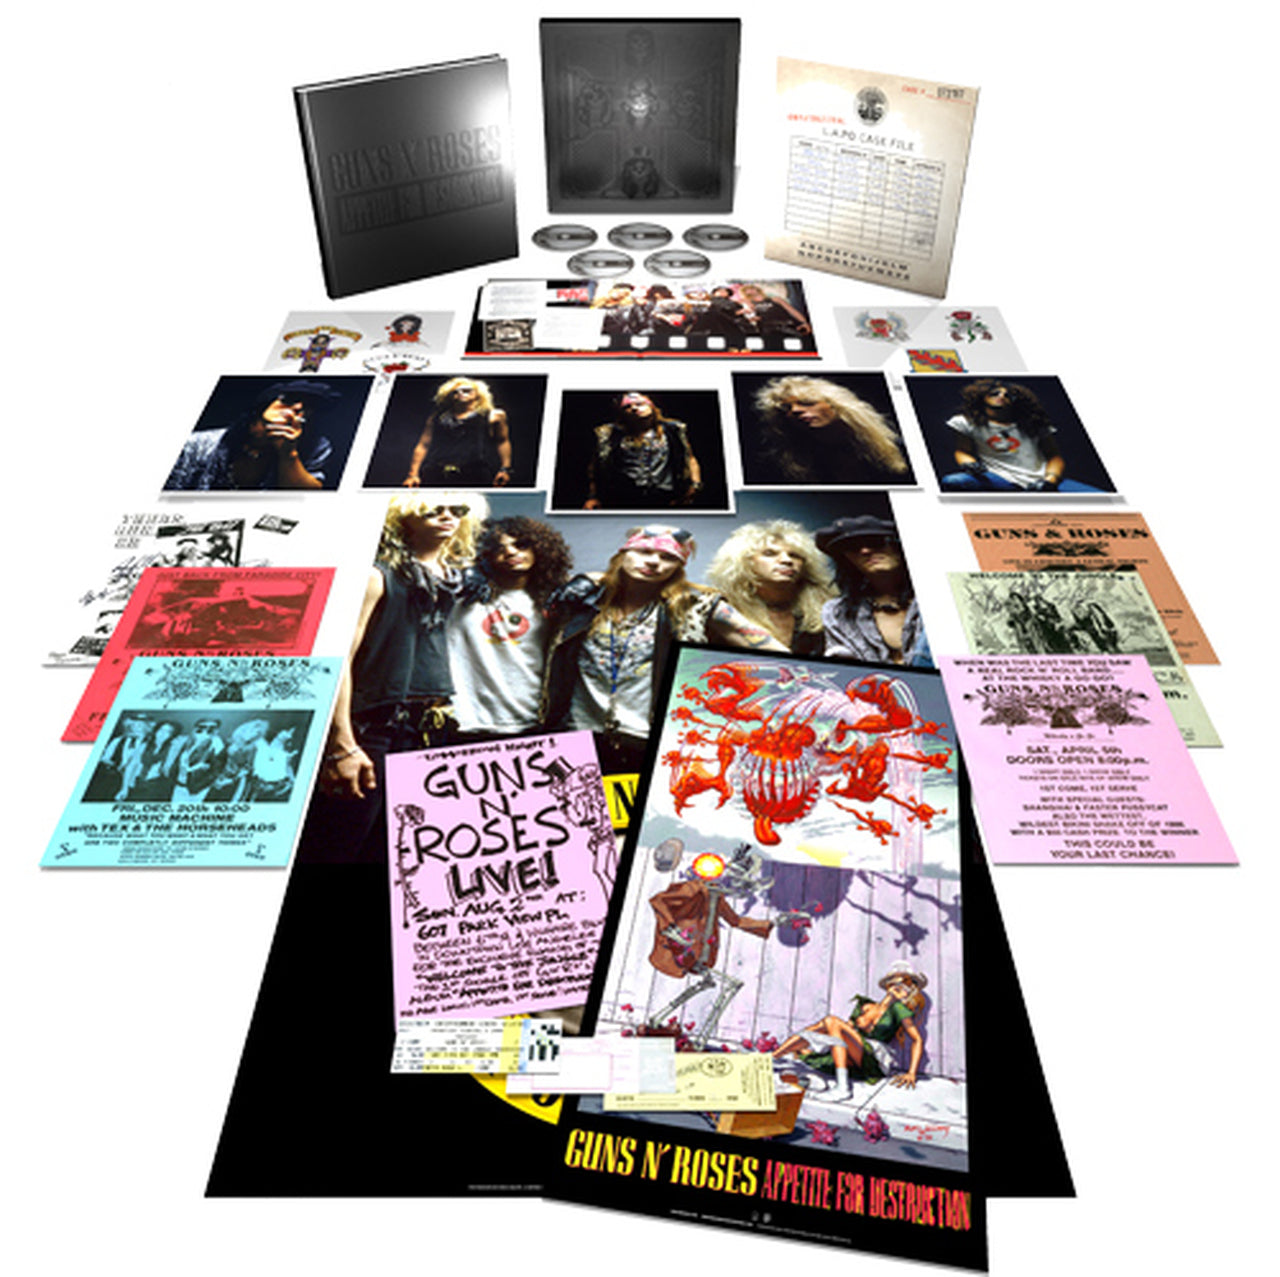 Guns N' Roses Appetite For Destruction Super Deluxe Edition 4CD, Blu-Ray Audio & Book Box Set